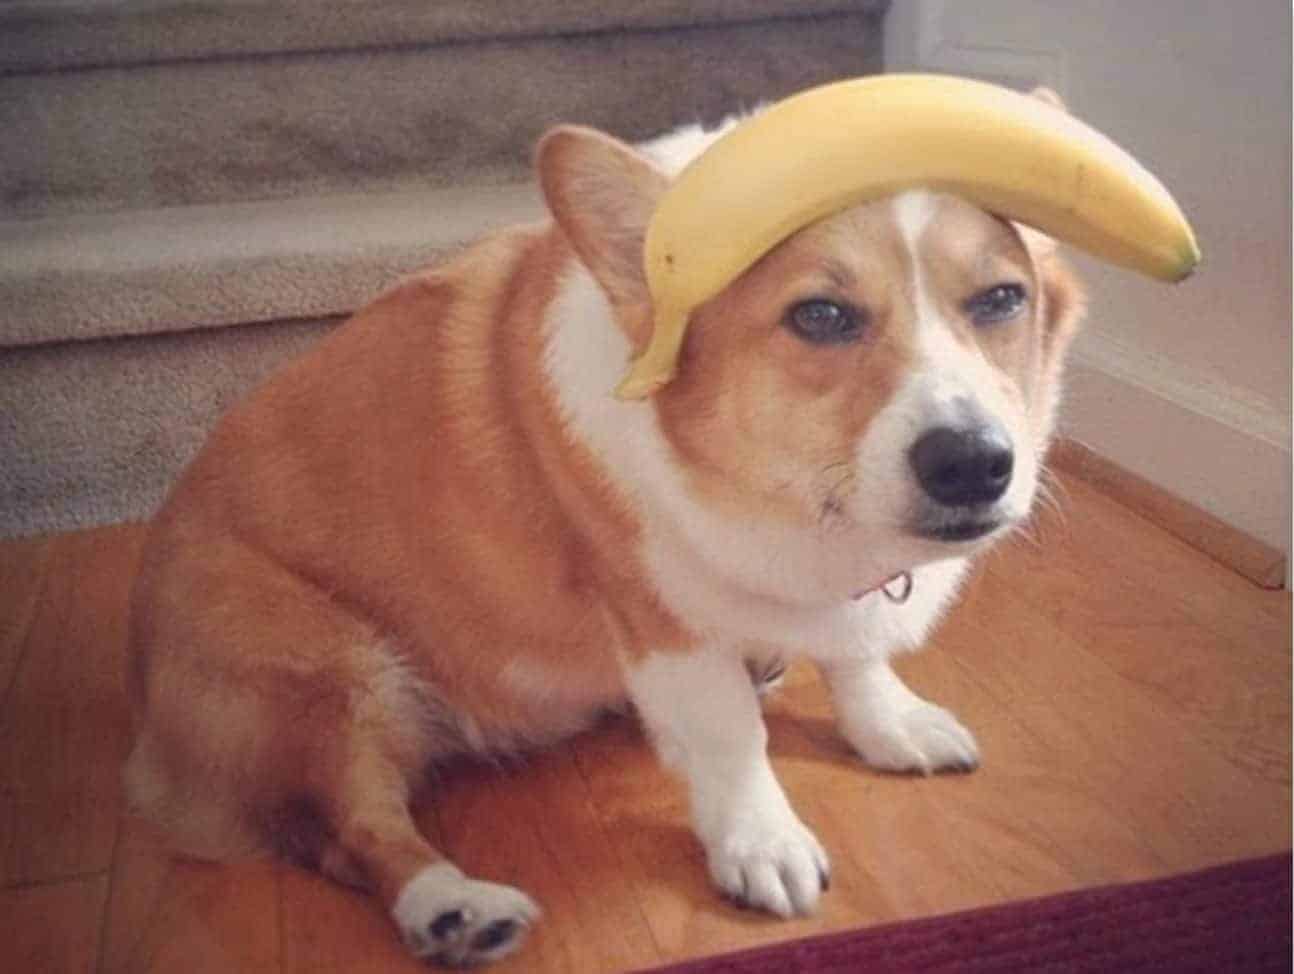 Can dogs eat bananas safely? Dogs can eat them only in moderation.